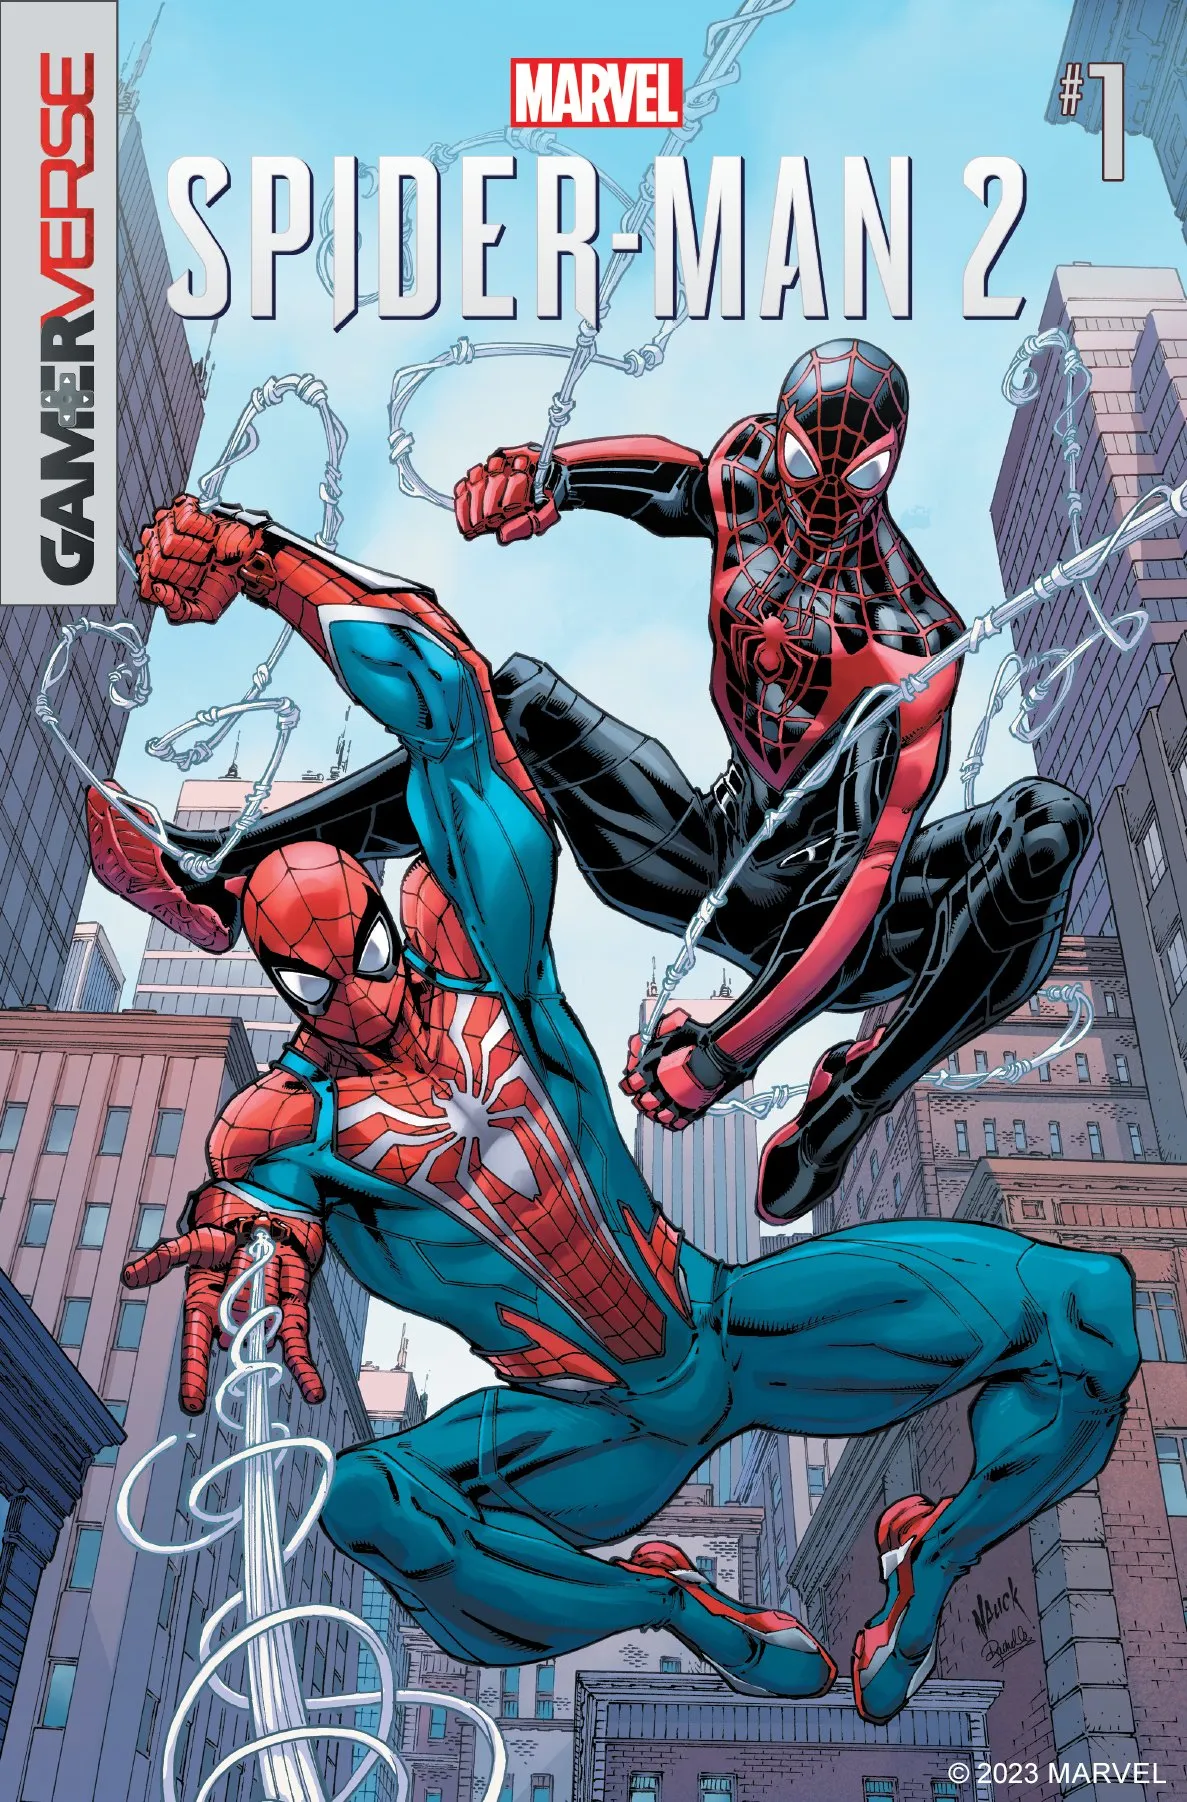 marvels-spider-man-2-comic-appearing-on-free-comic-book-day-2.jpeg